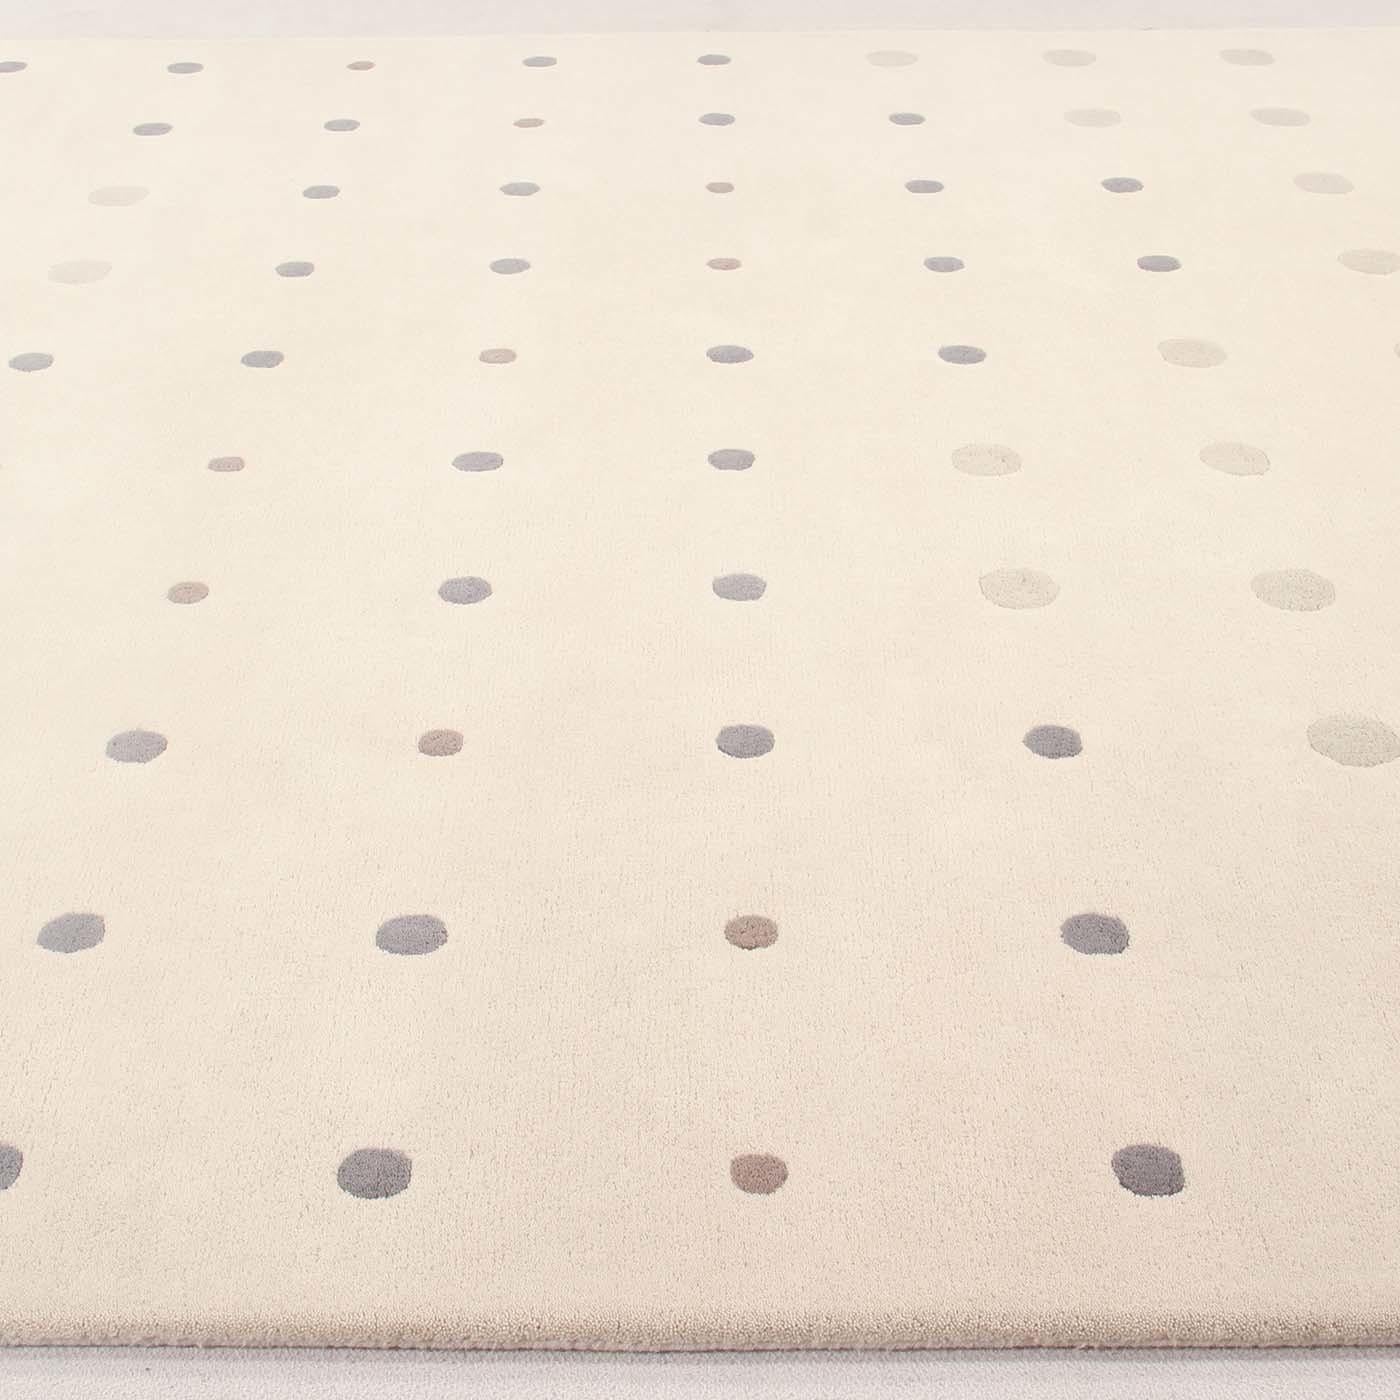 A fun and playful polka dot motif is featured on the Bubbles carpet, a design by the modern and ingenious designer Joe Colombo. Bubbles was born from the 1968 graphic design project that Joe Colombo undertook, like the Bolle table lamp in 1964. The